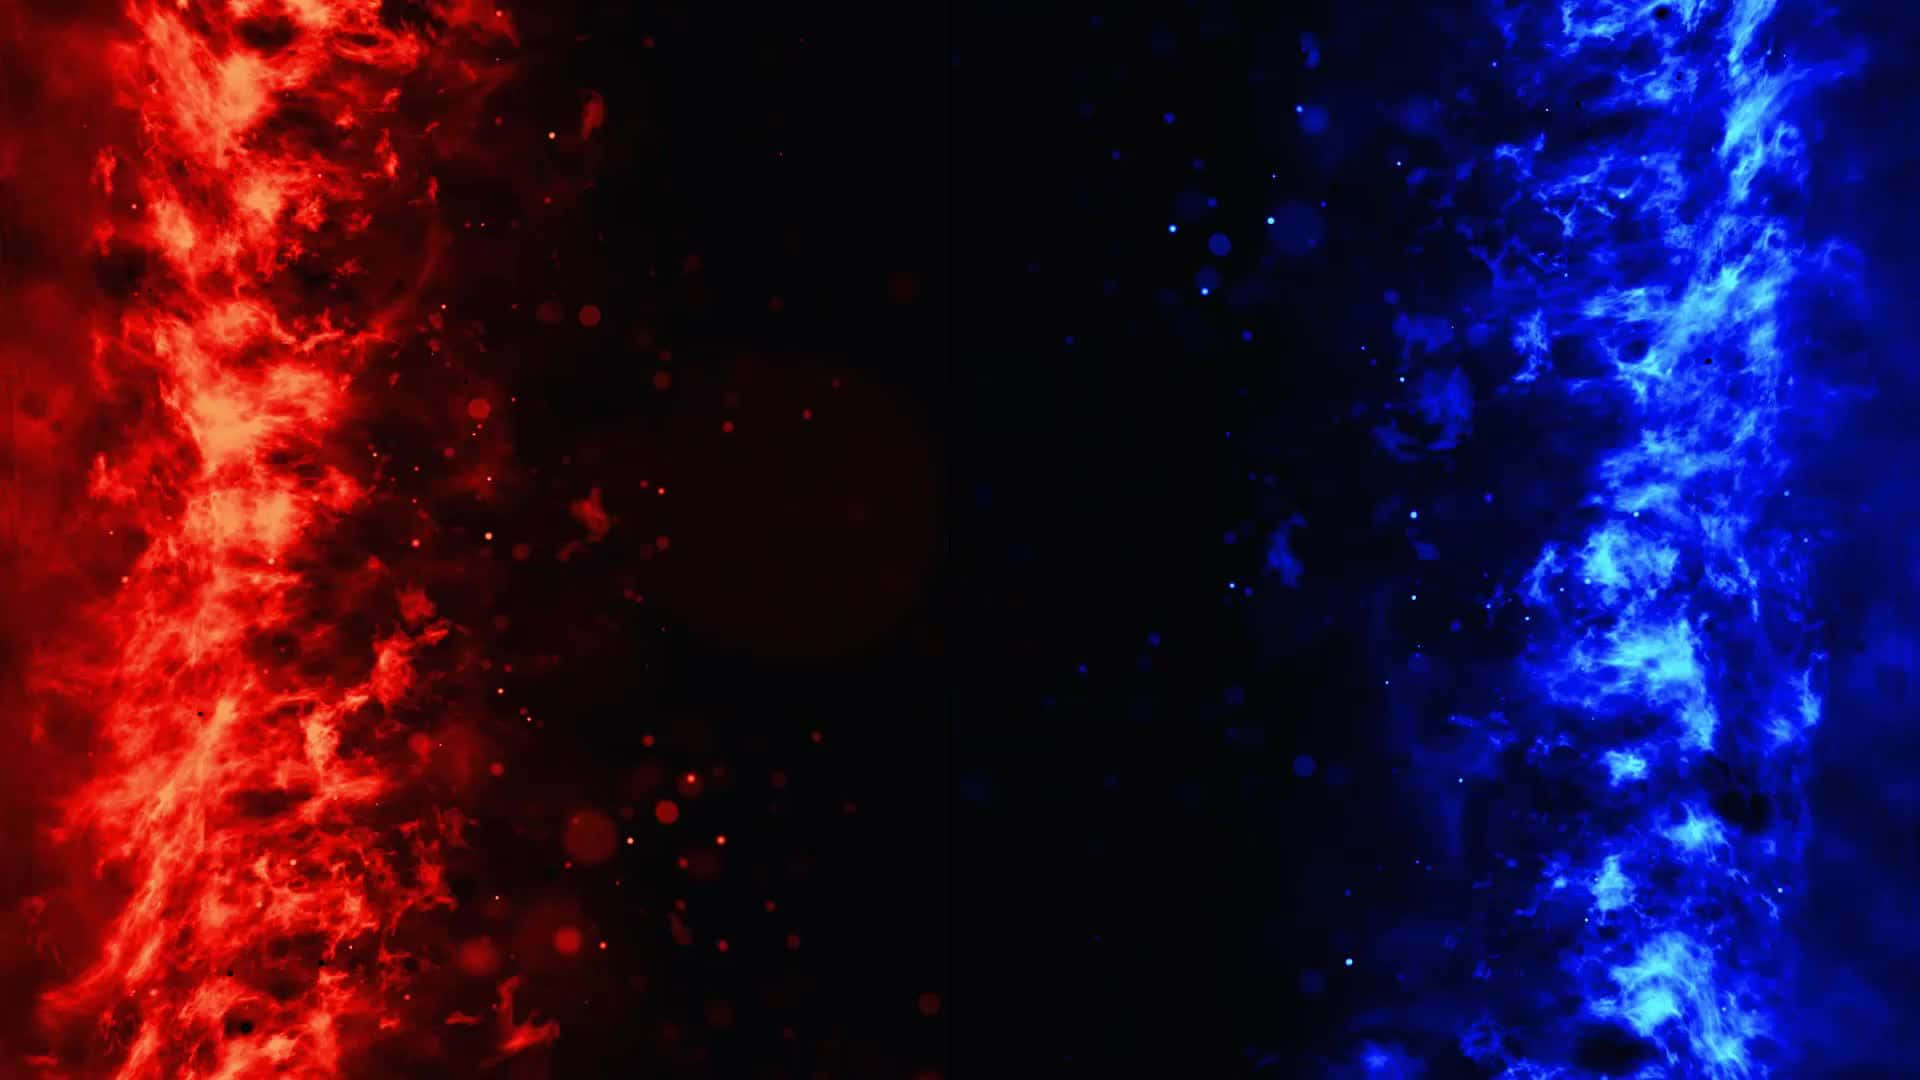 Bright Red and Blue Flames Dancing on the Night Sky Wallpaper